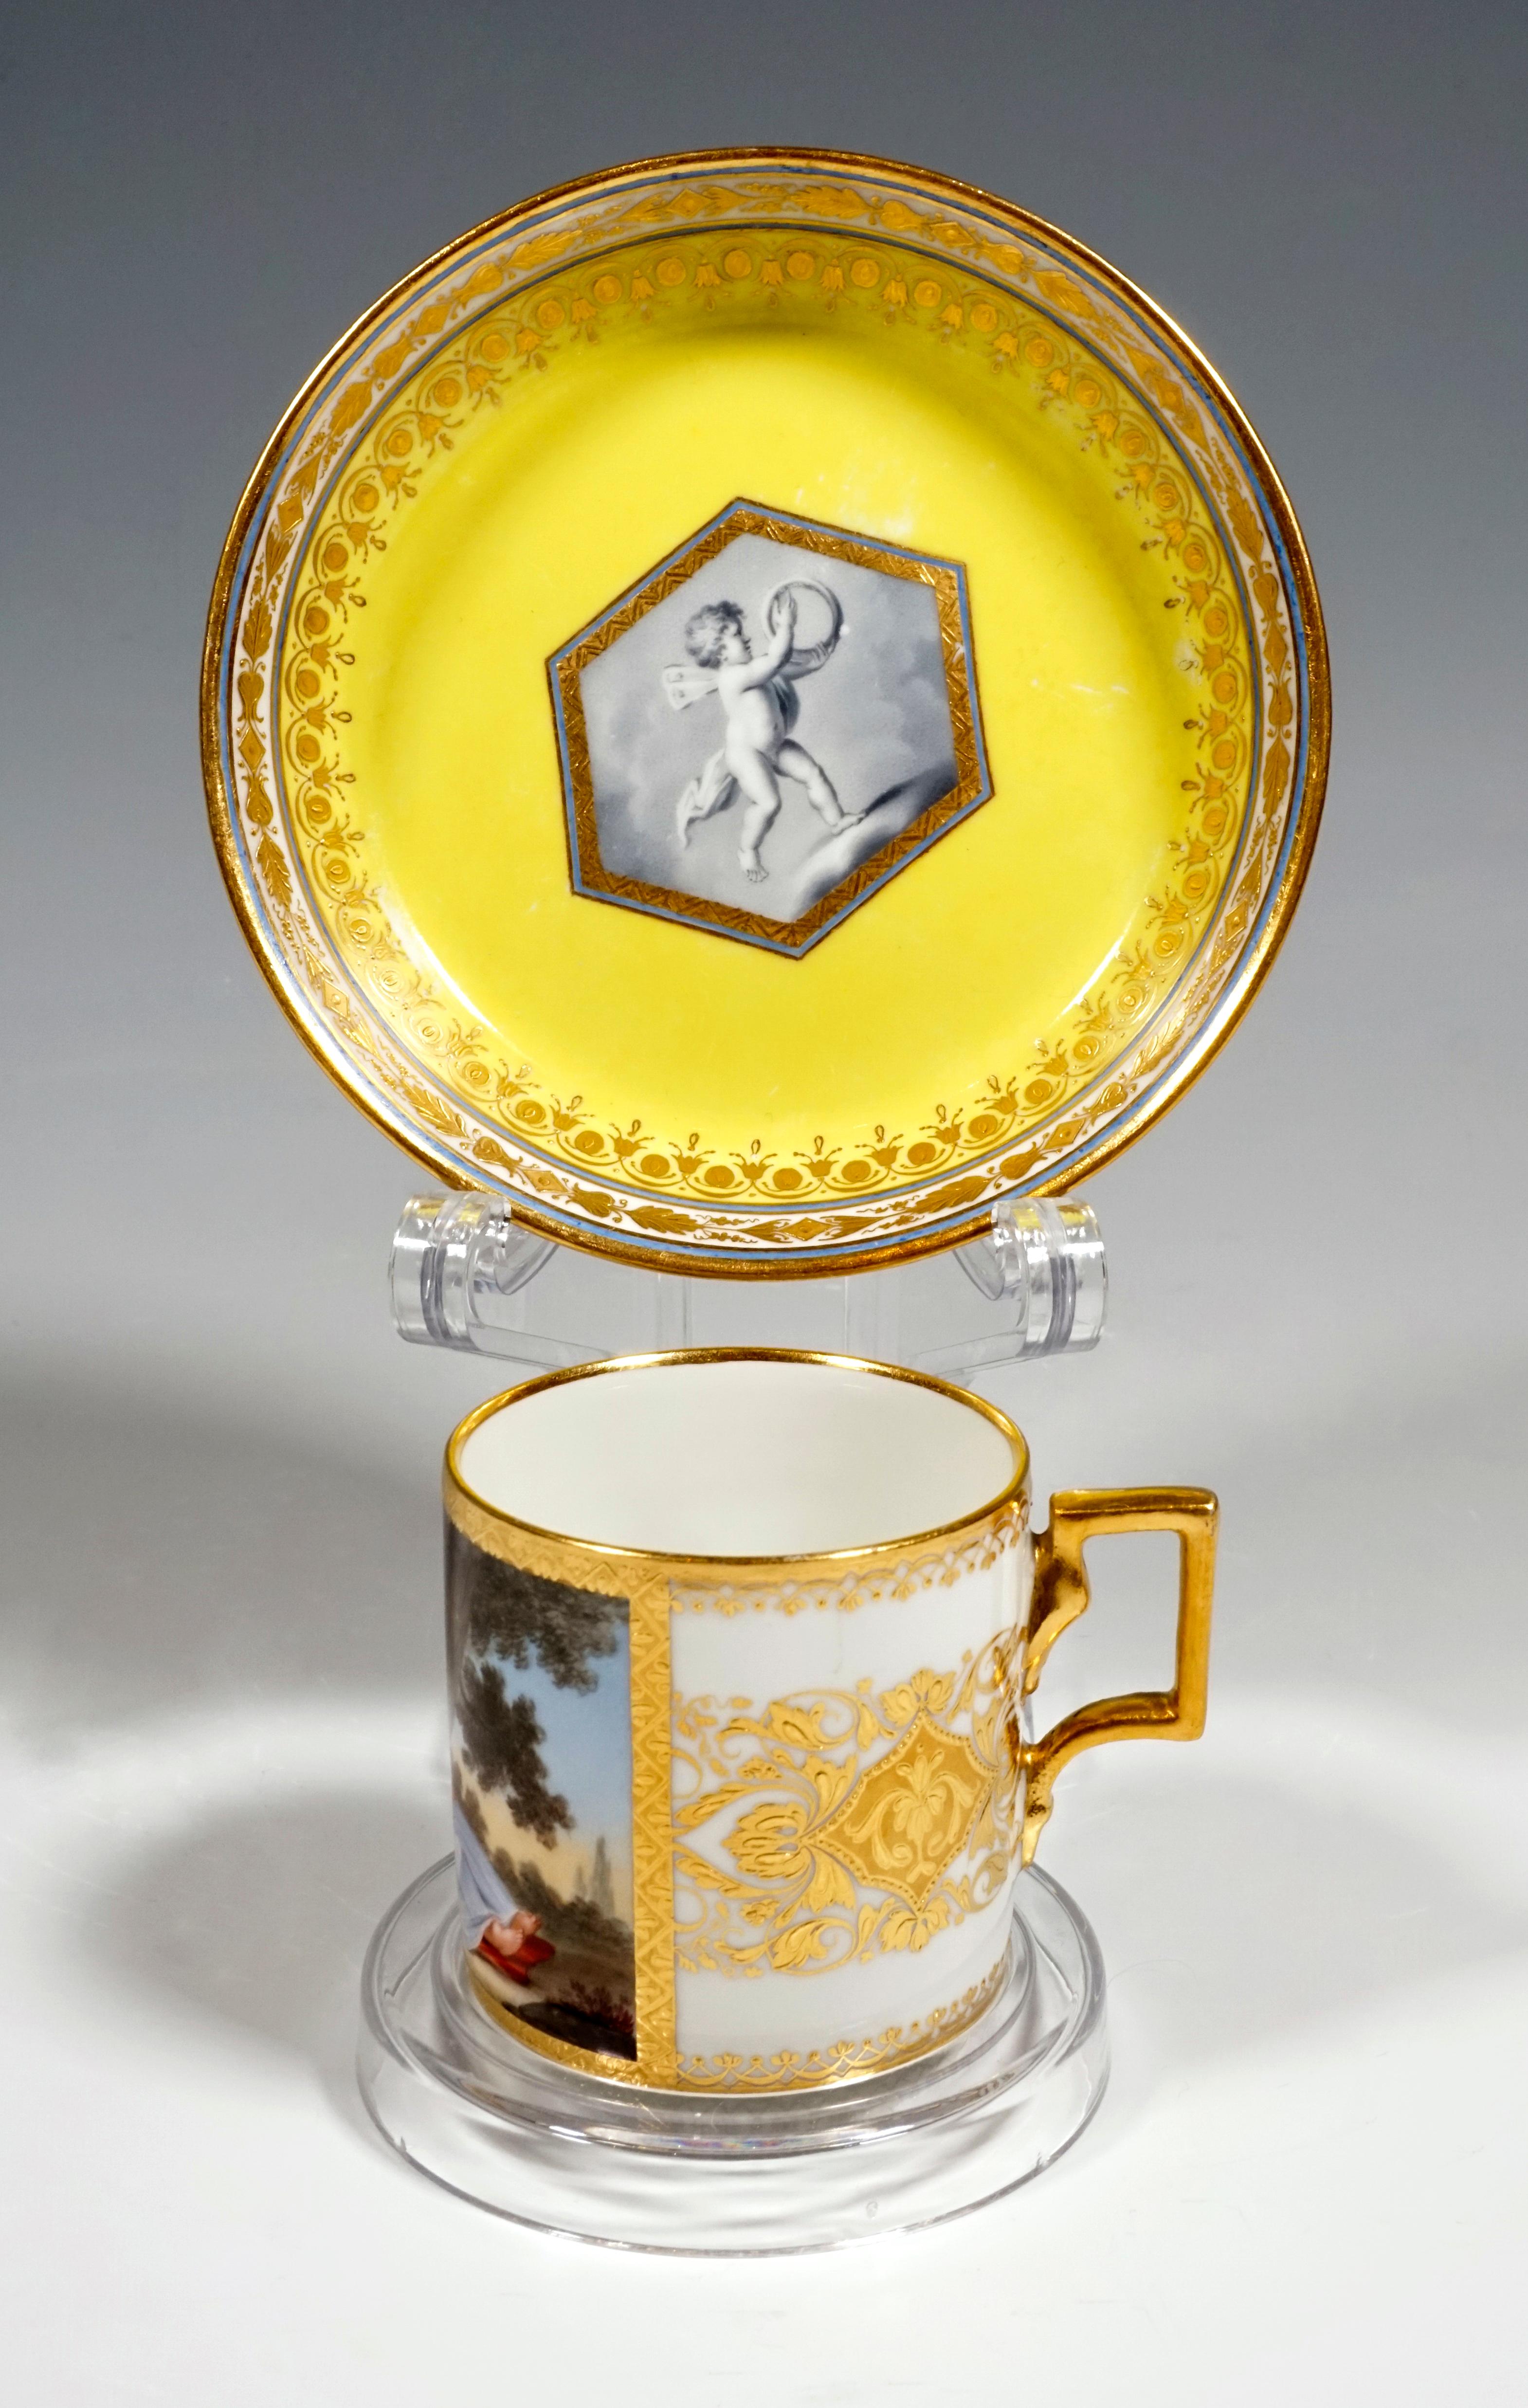 Extraordinarily decorated porcelain cup with saucer:
The front of the cylindrical white cup is provided with a reserve in polychromy over the entire height: a little girl is sleeping on a bed of sheaves under a tree. The scene is framed in gold